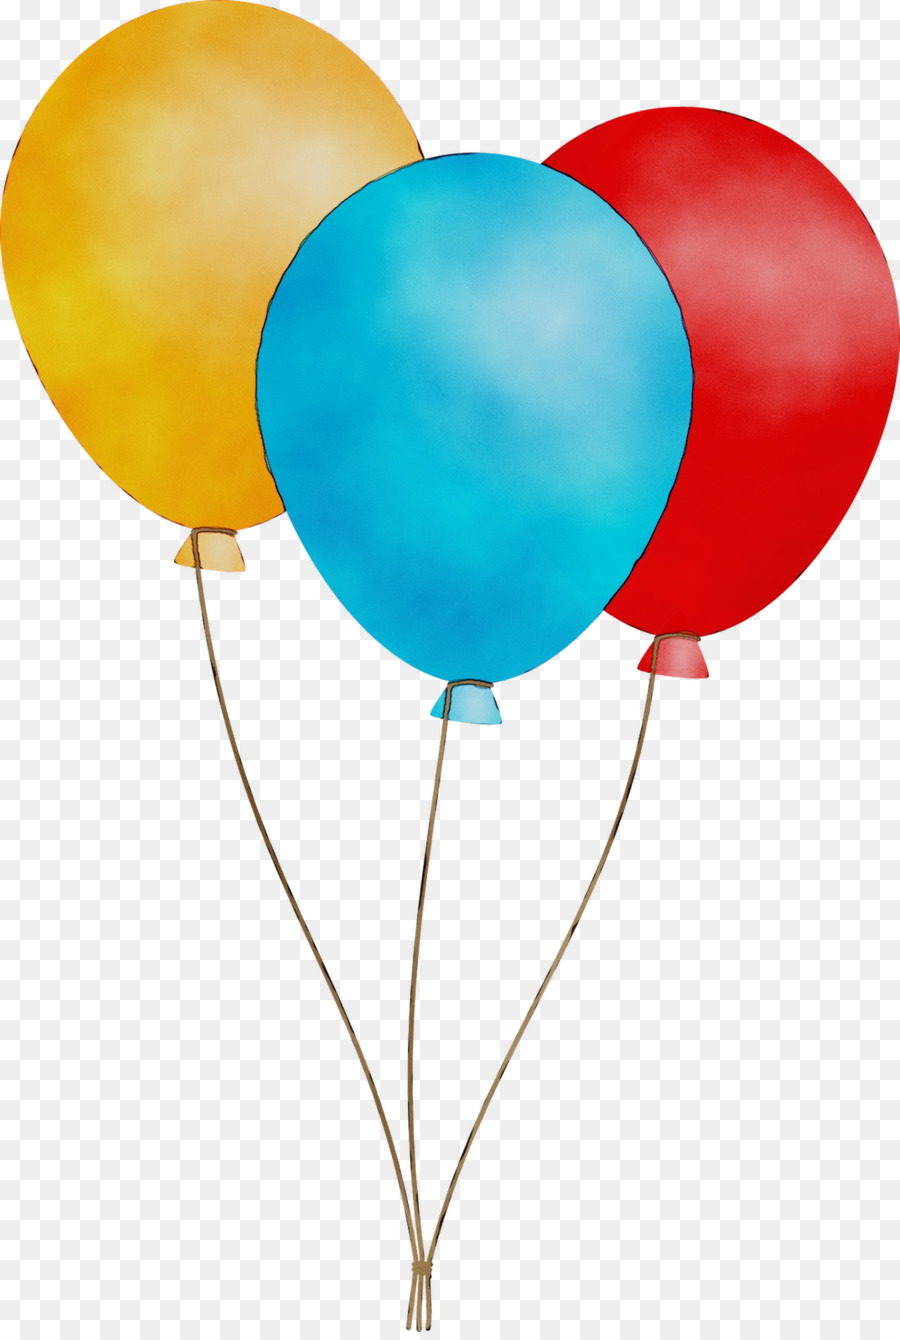 Transparent Balloon (Large) Portable Network Graphics Clip art Image -  png download - 1286*1903 - Free Transparent Balloon png Download.